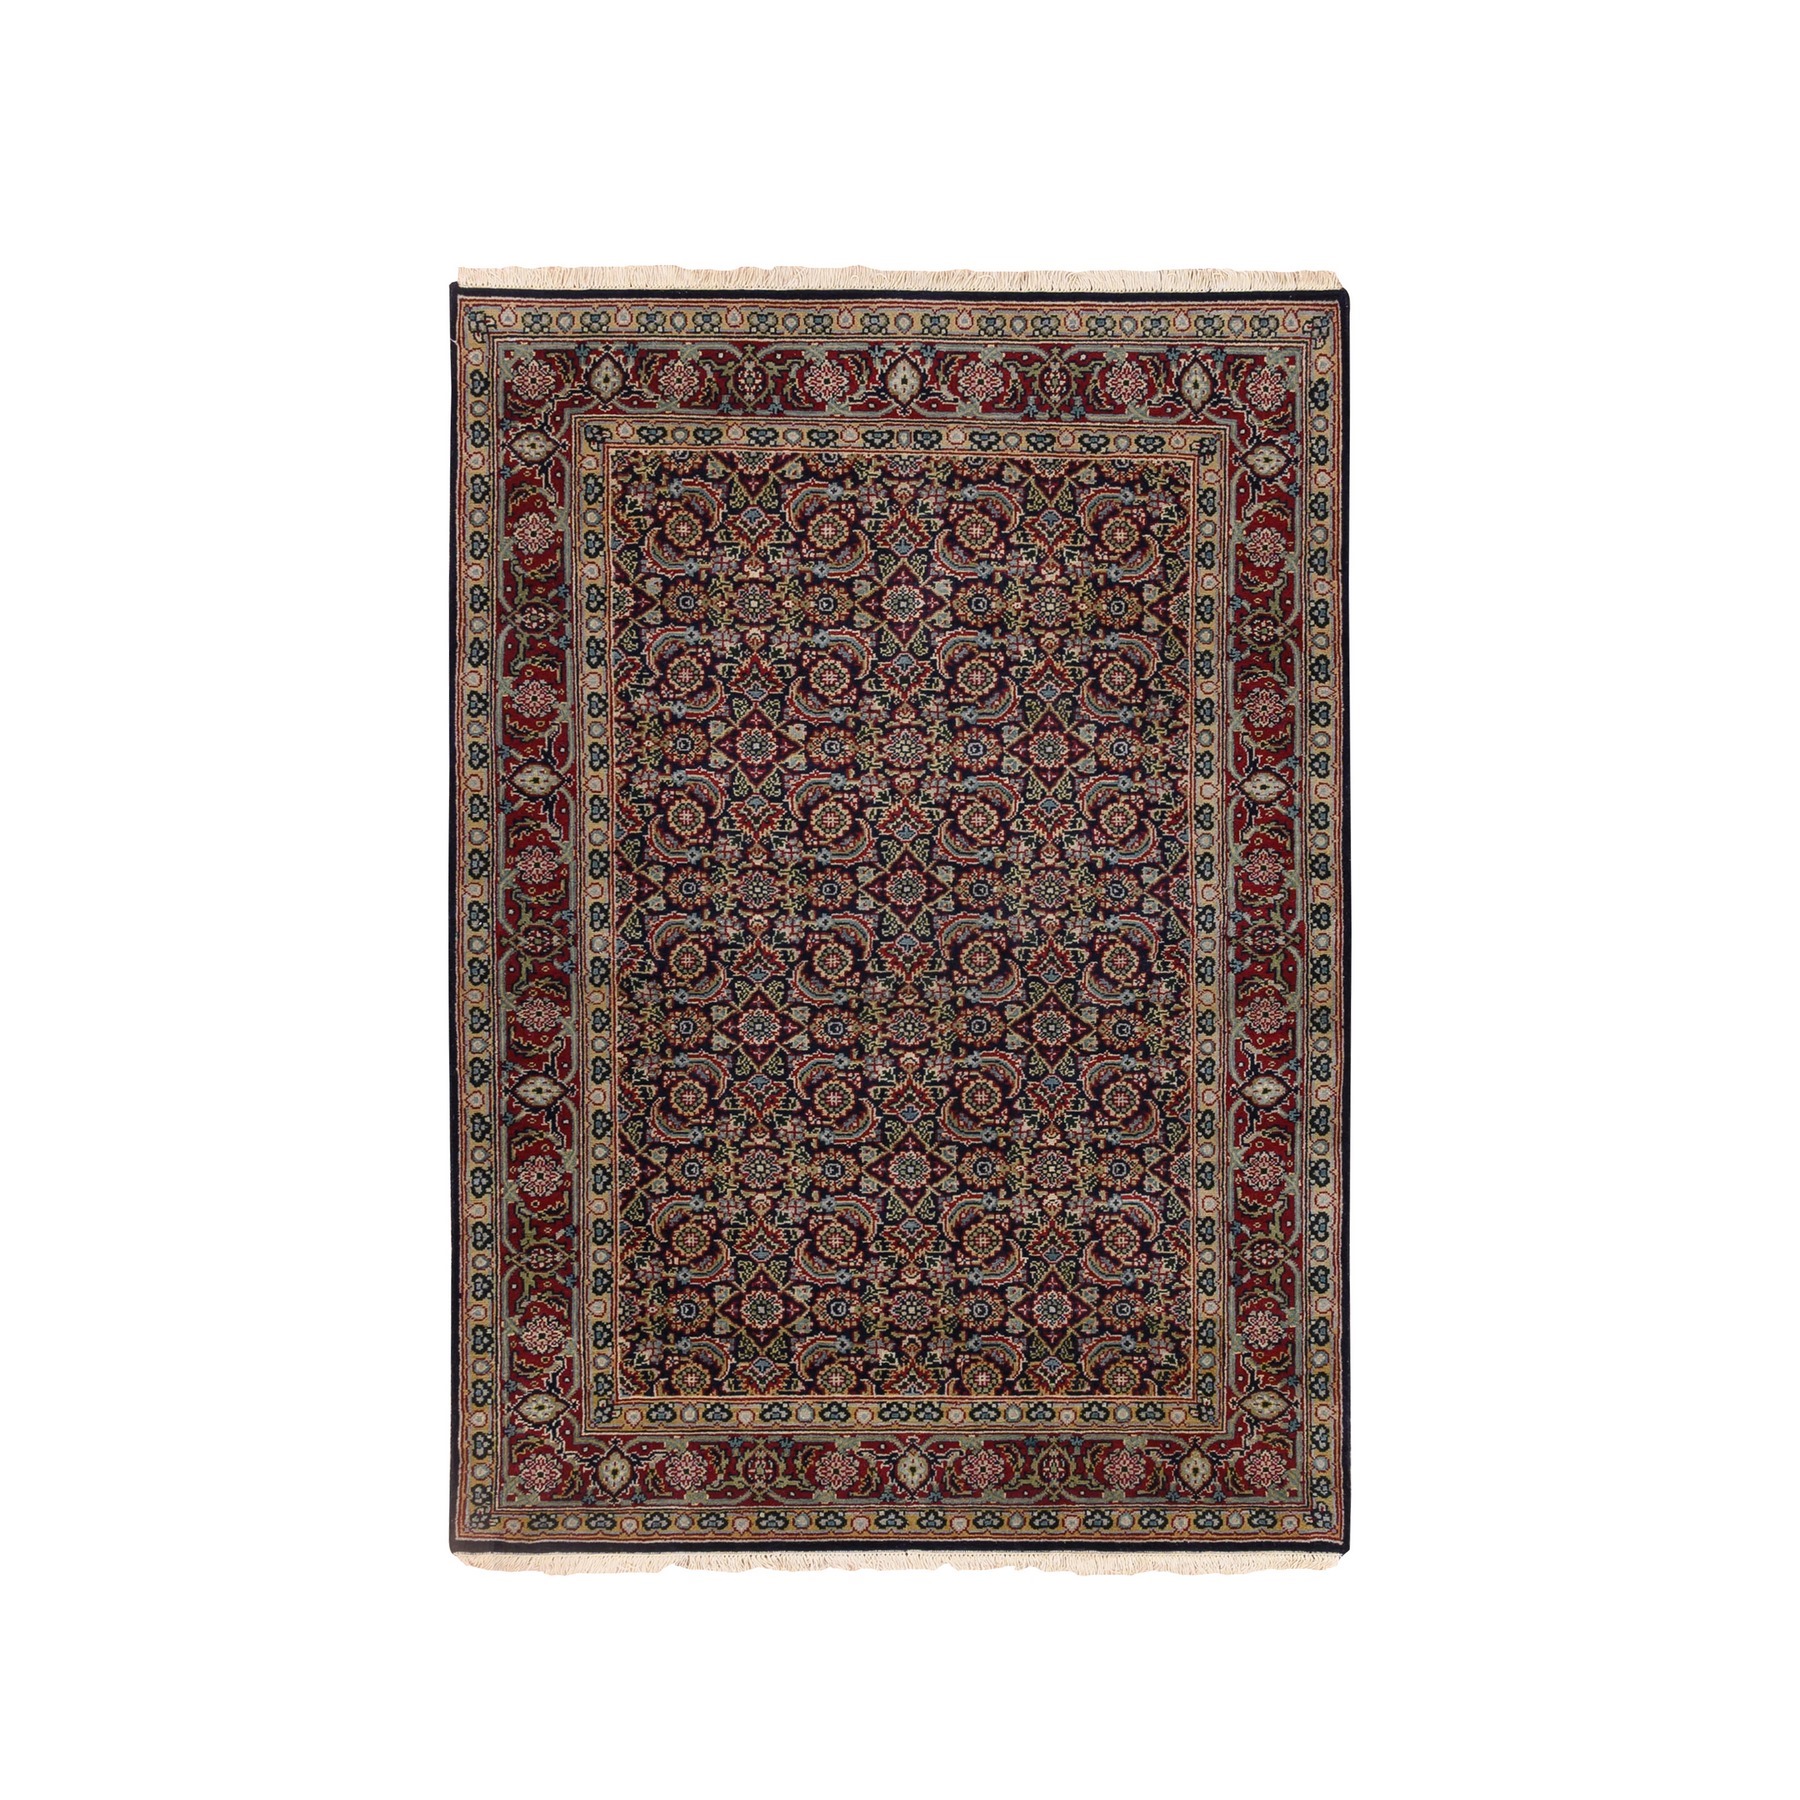 Pirniakan Collection Hand Knotted Blue Rug No: 1124688